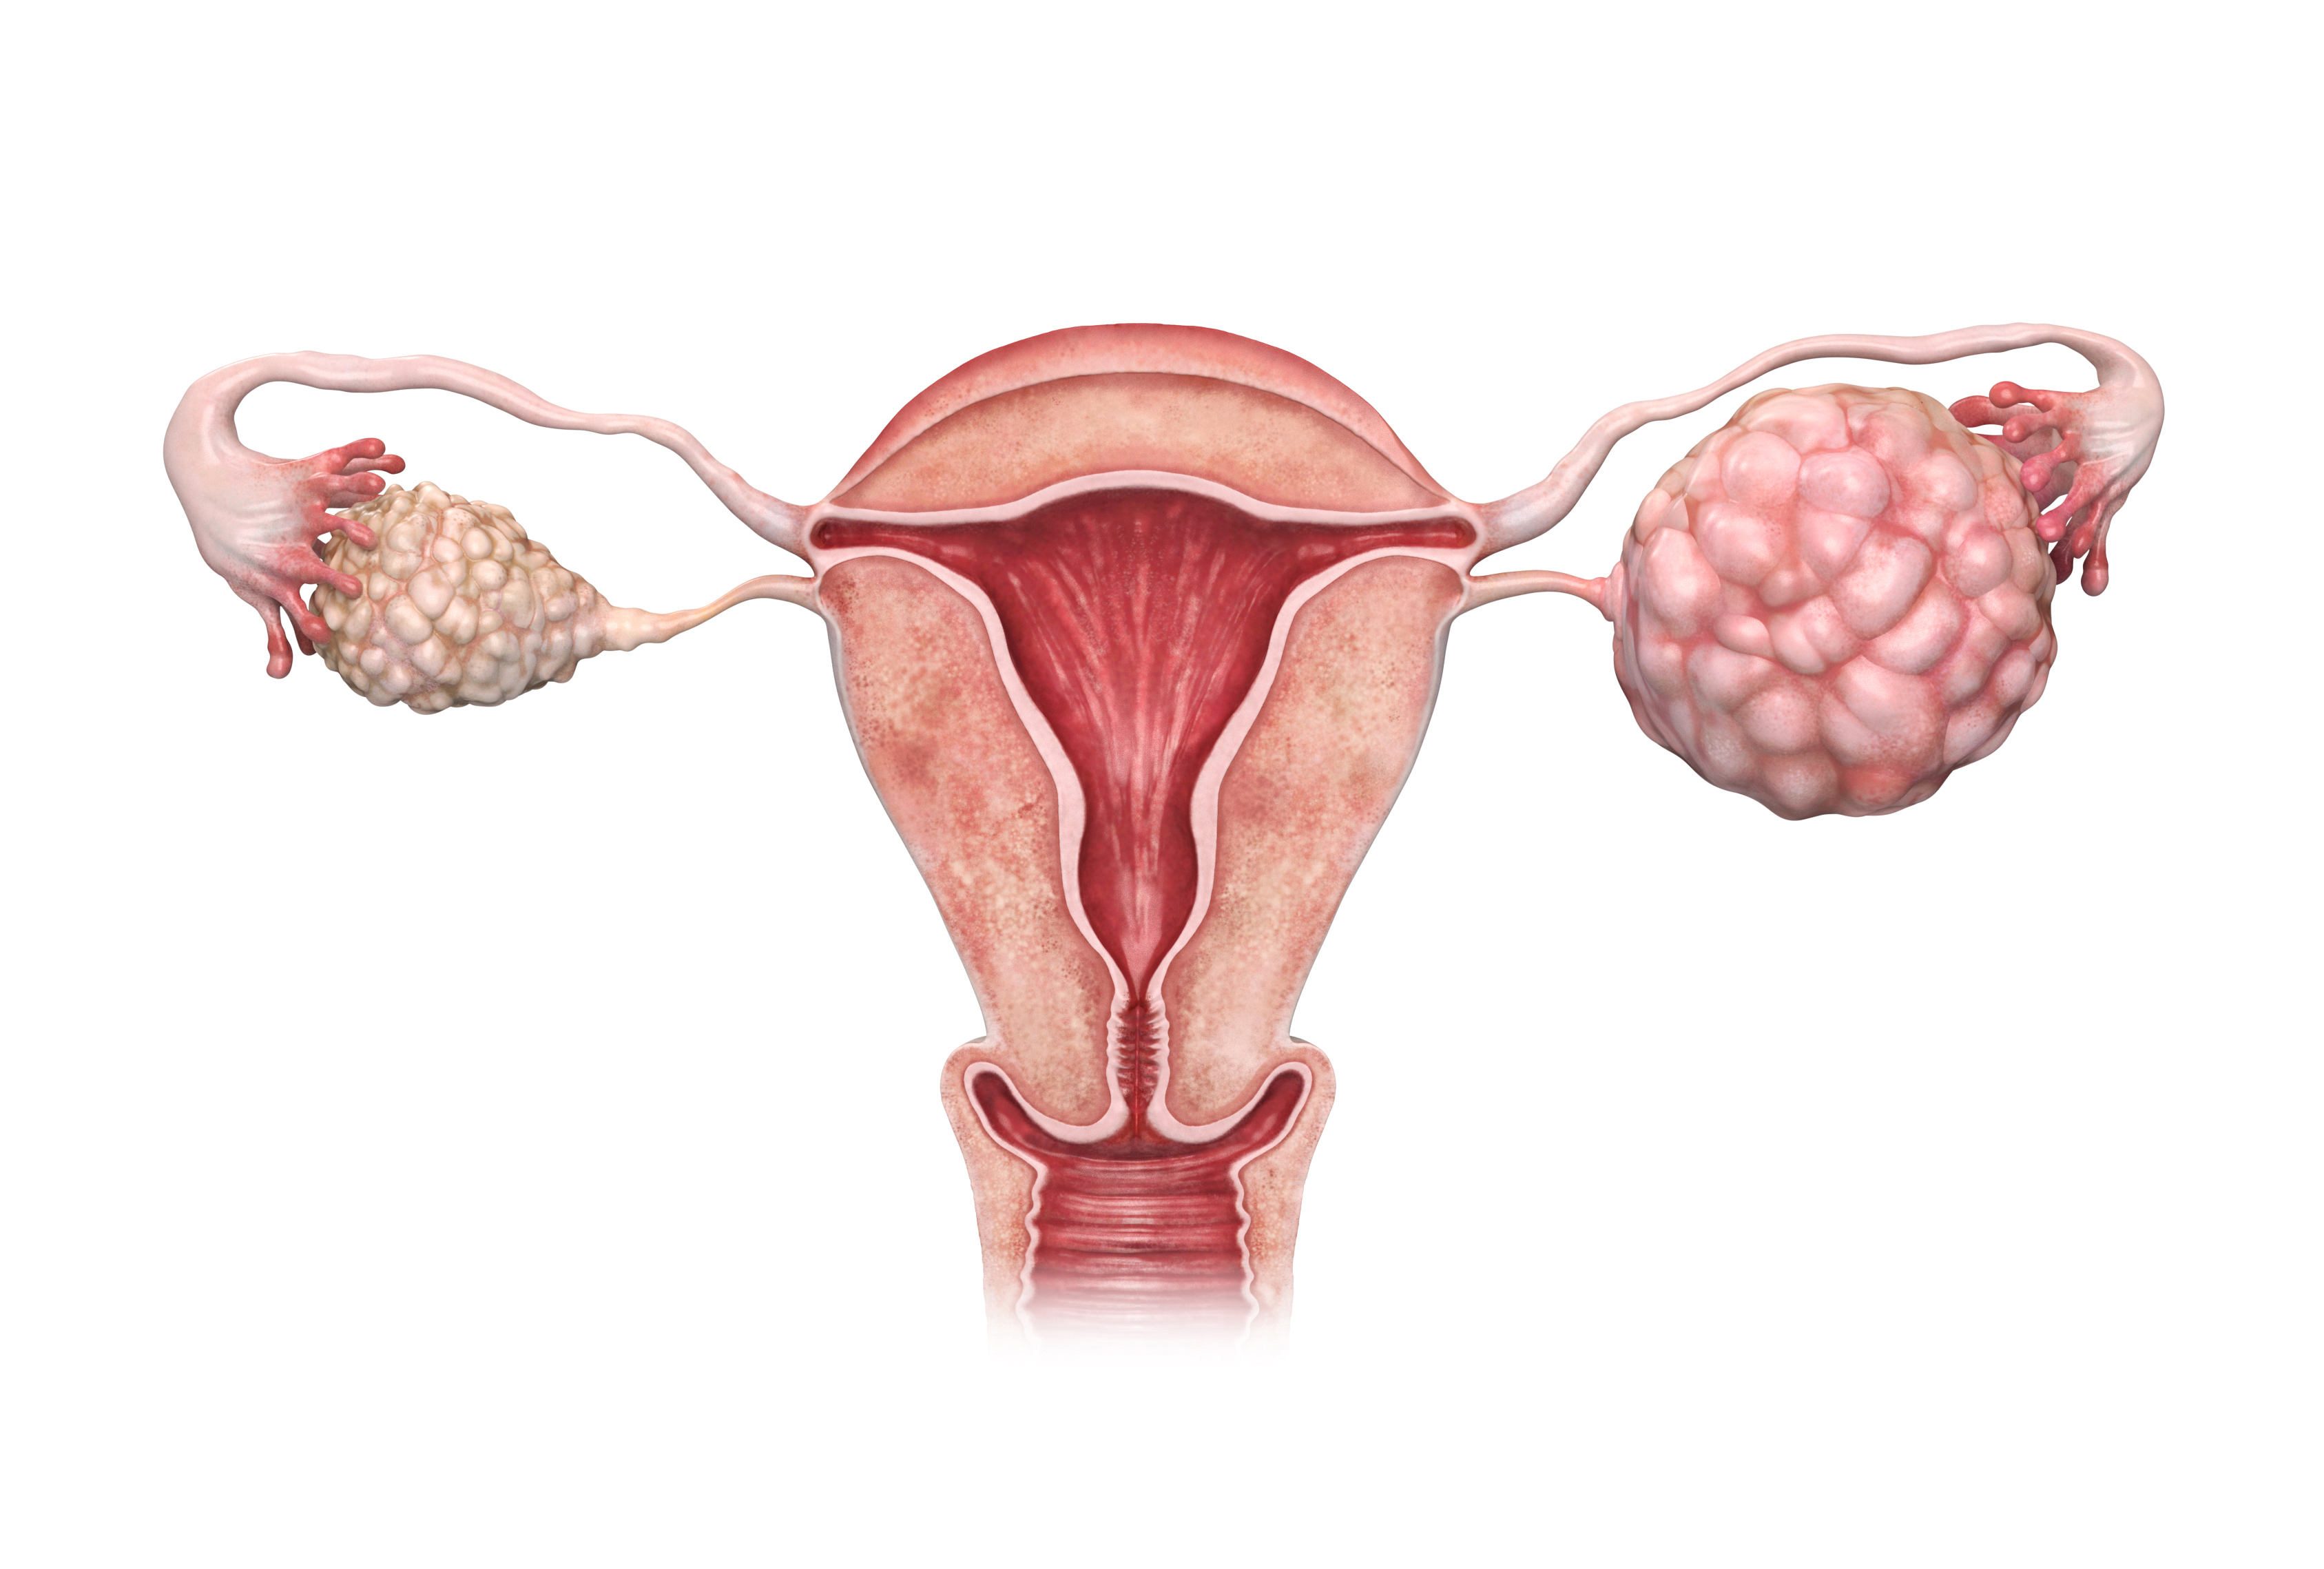 Genetic Testing for Ovarian Cancer Patients is Underused